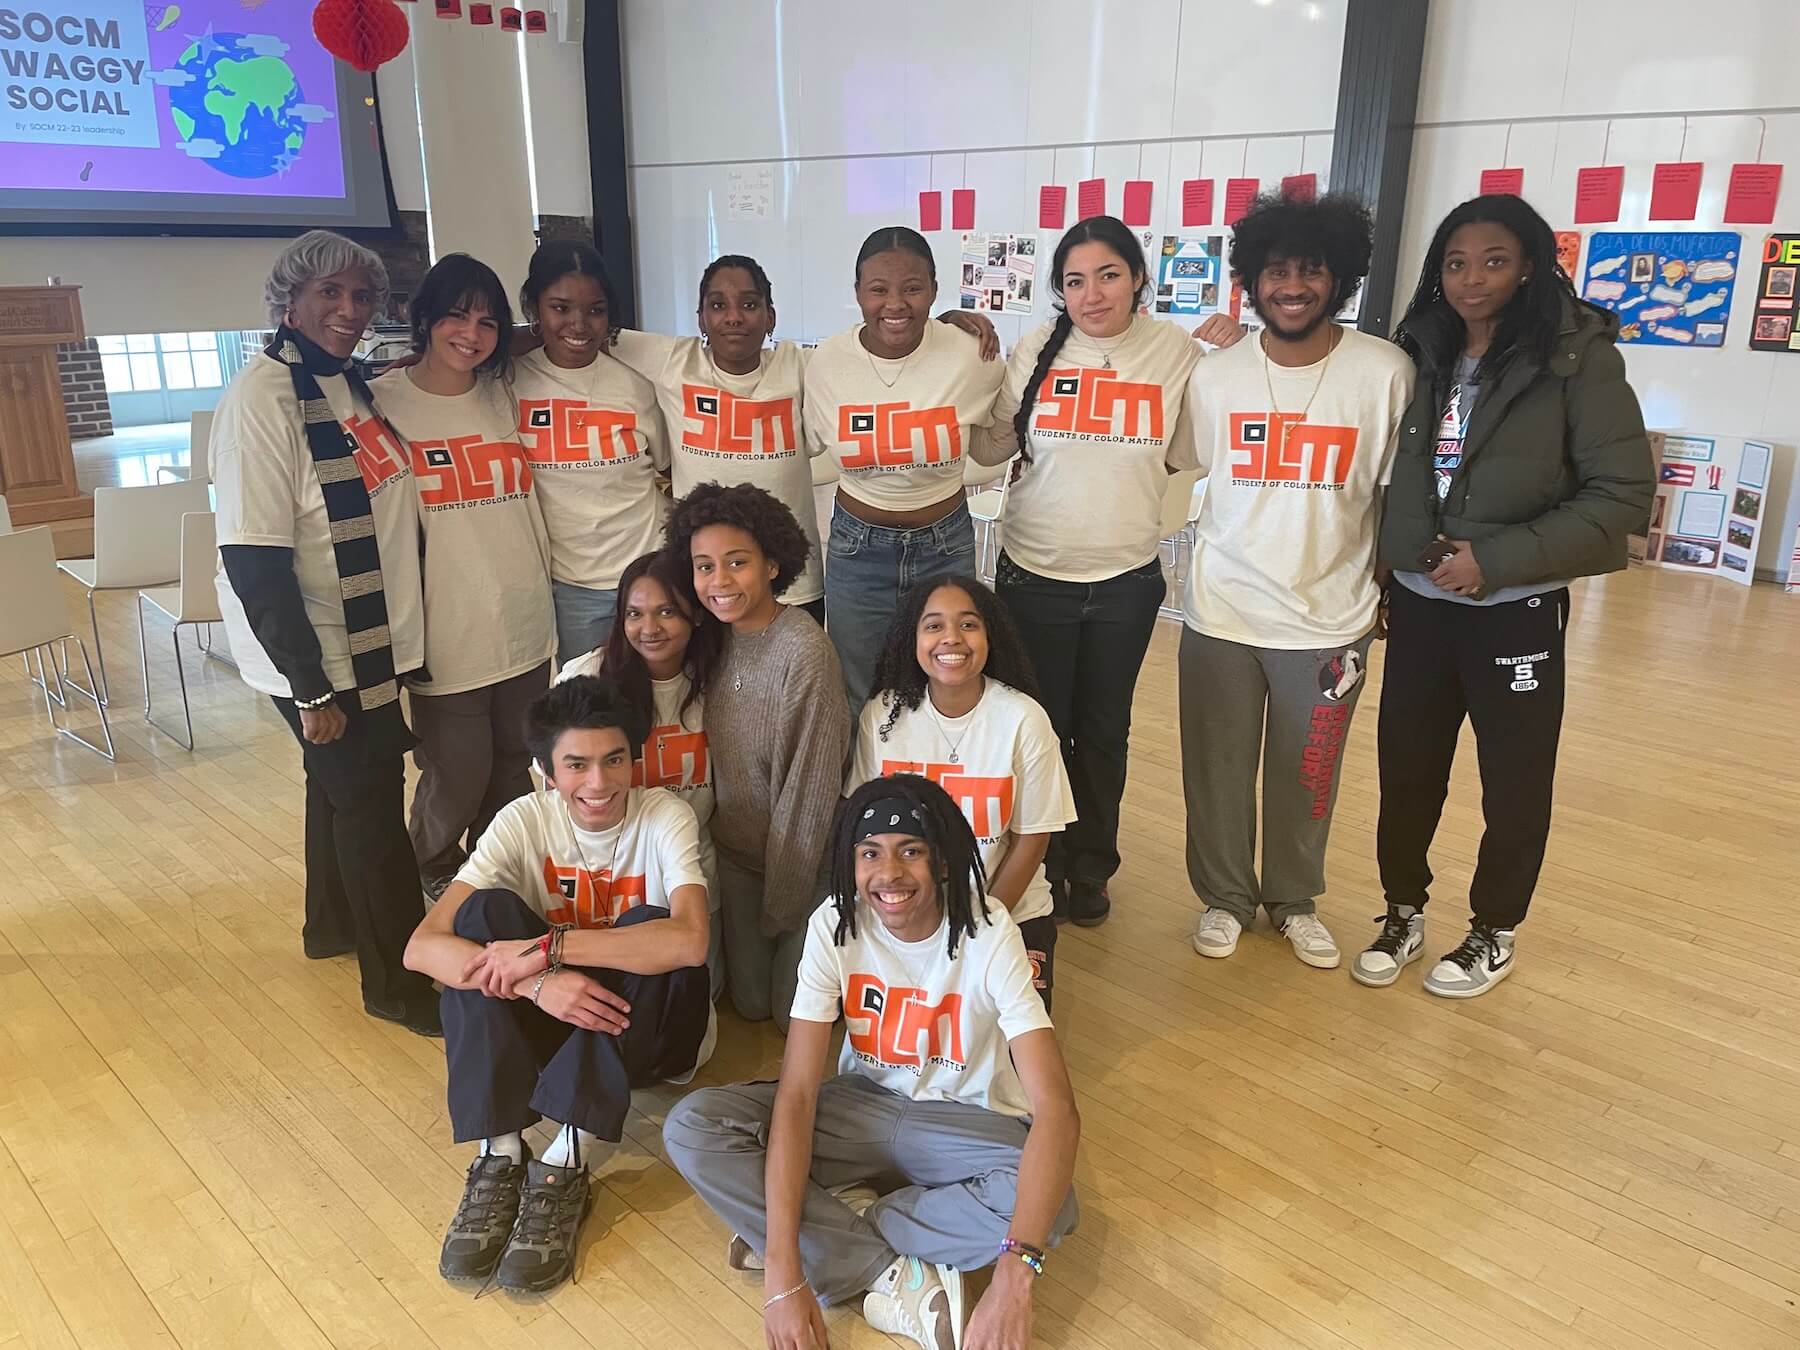 Ethical Culture Fieldston School's Students Of Color Matter (SOCM) group smile together at an event.